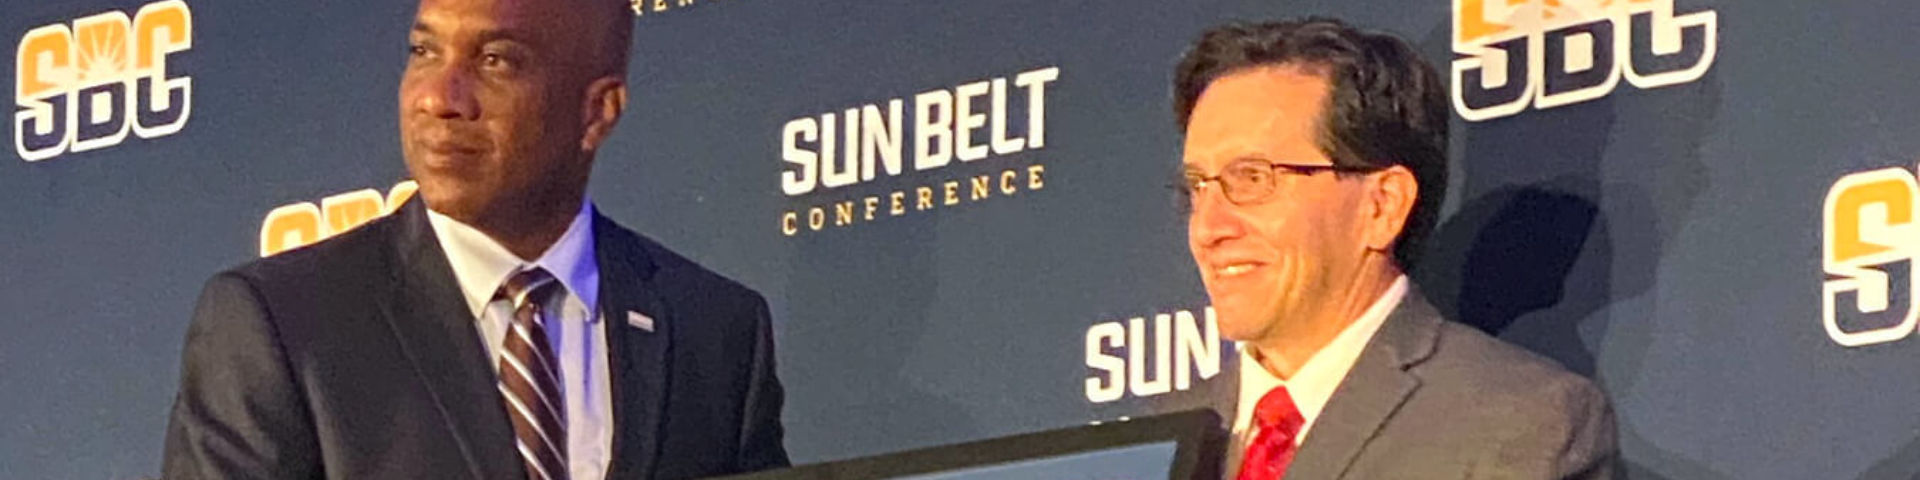 Benjamin Estrada, M.D., recognized by Sun Belt Conference for pandemic collaboration